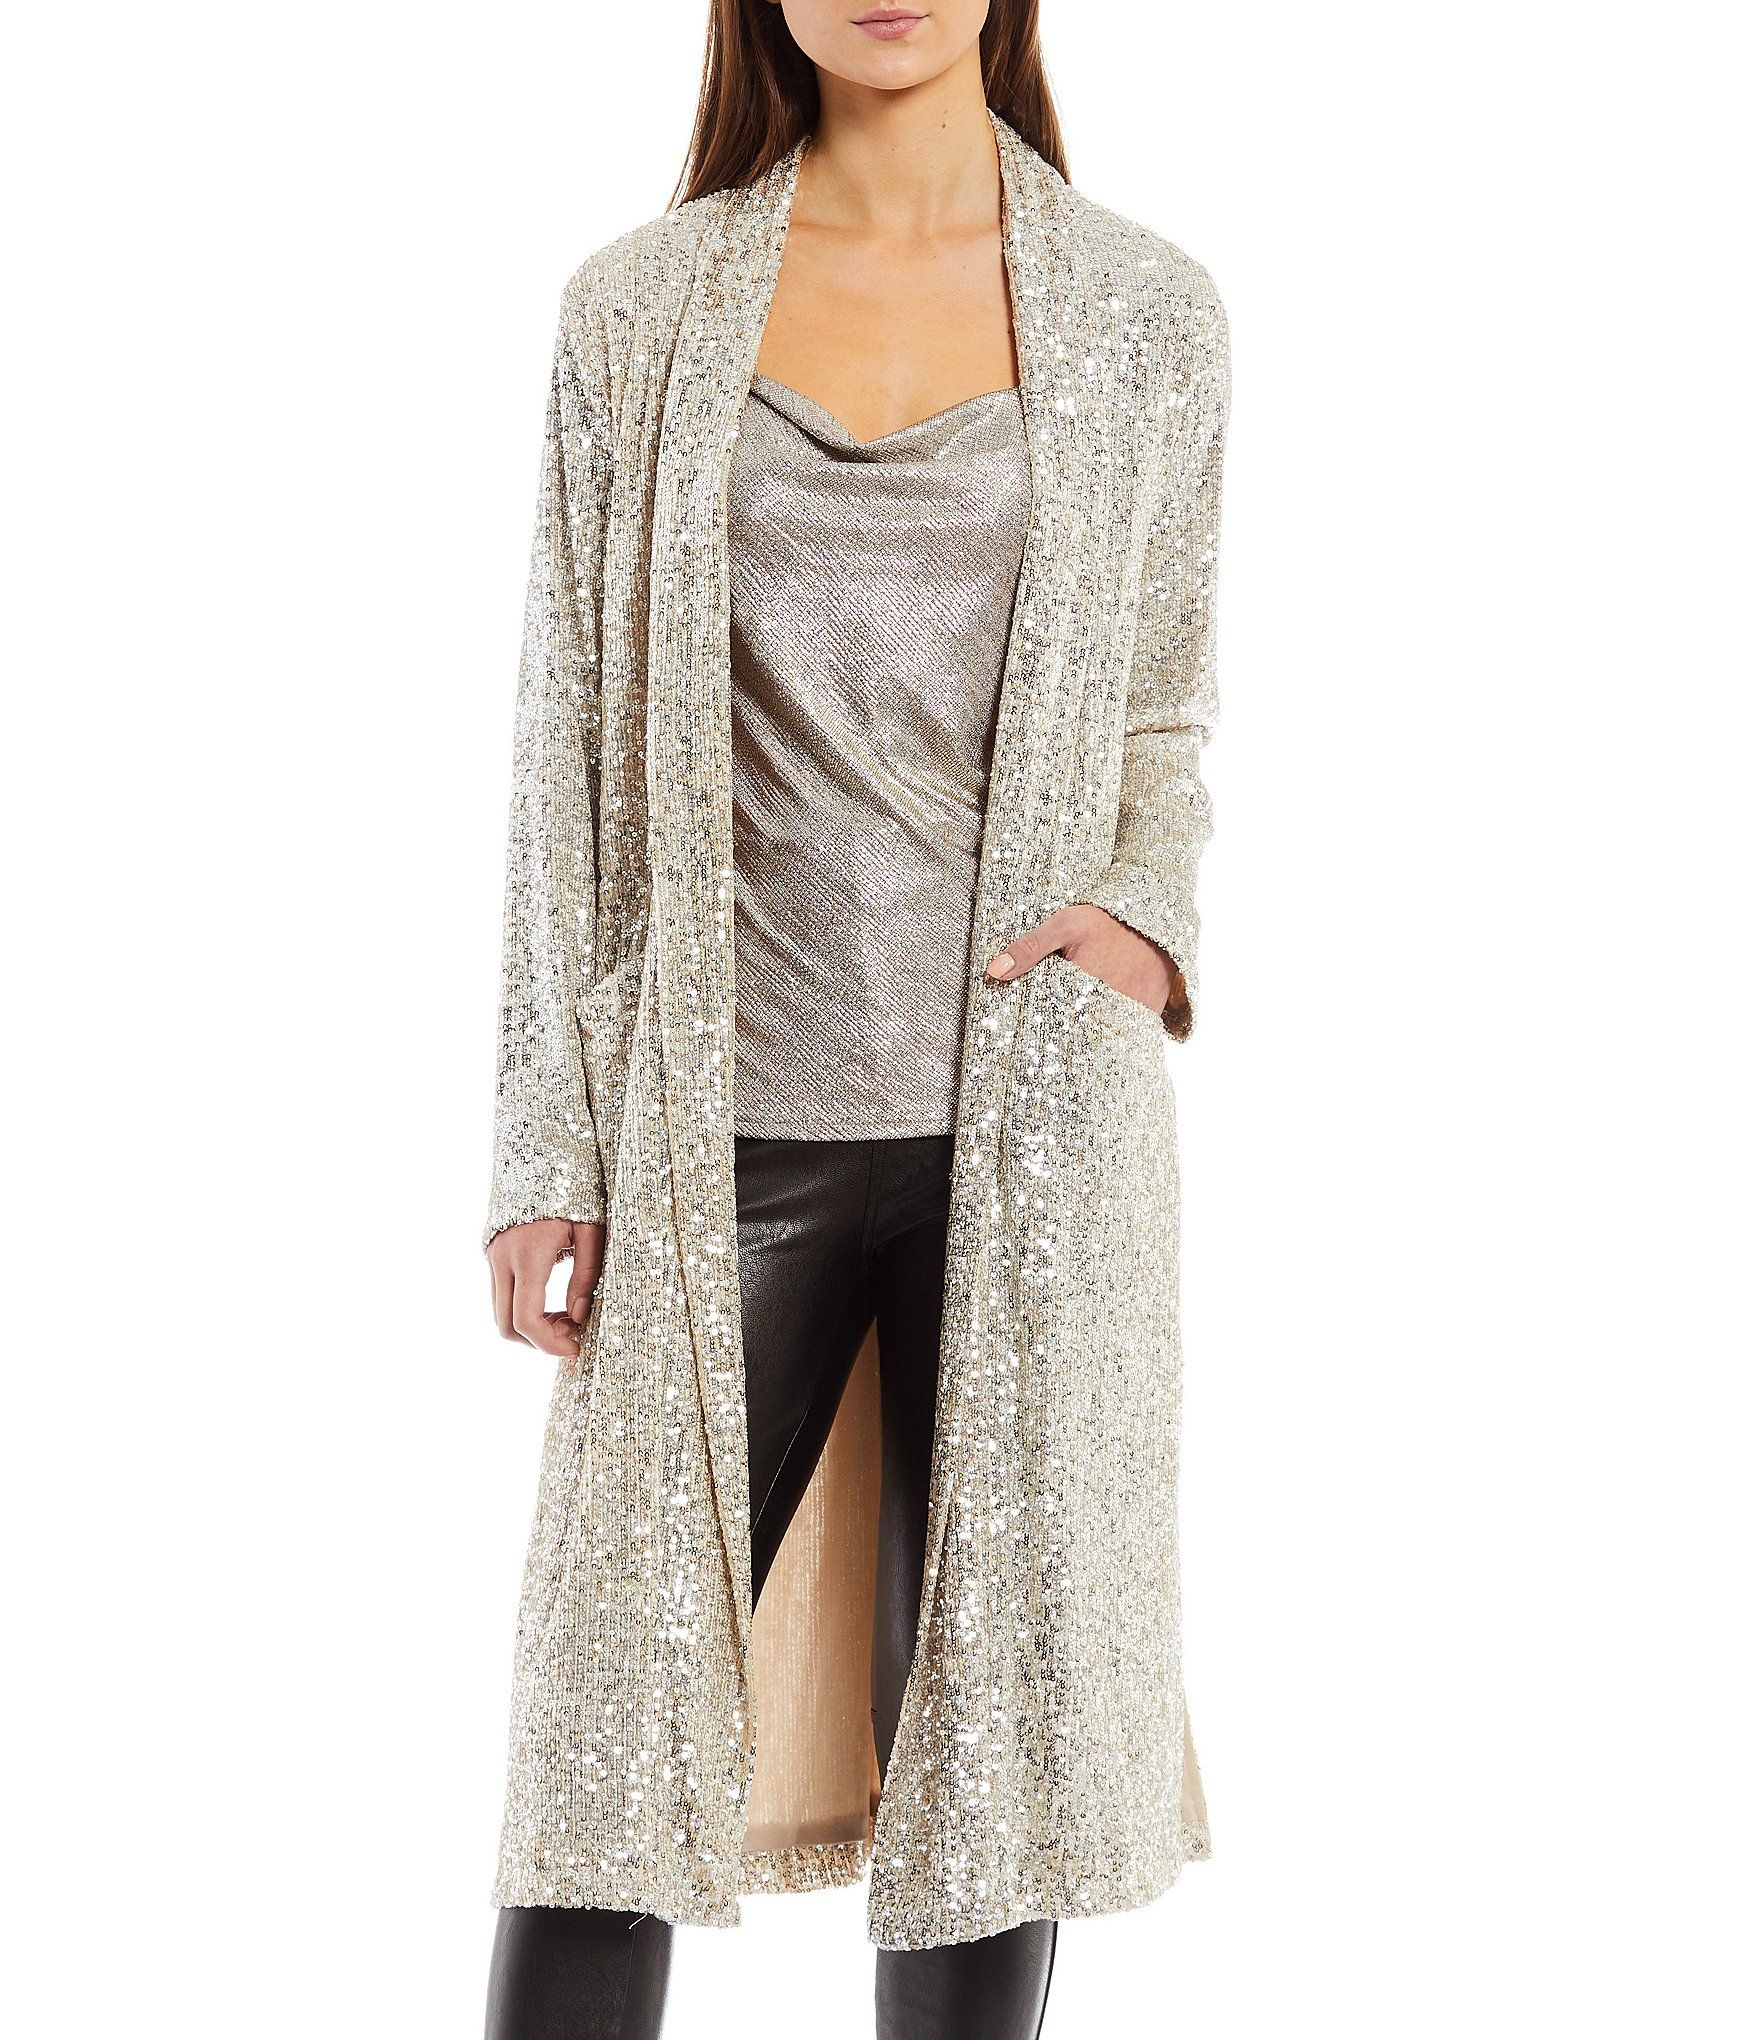 The Show Stopper Open Front Long Sleeve Sequin Duster | Dillards